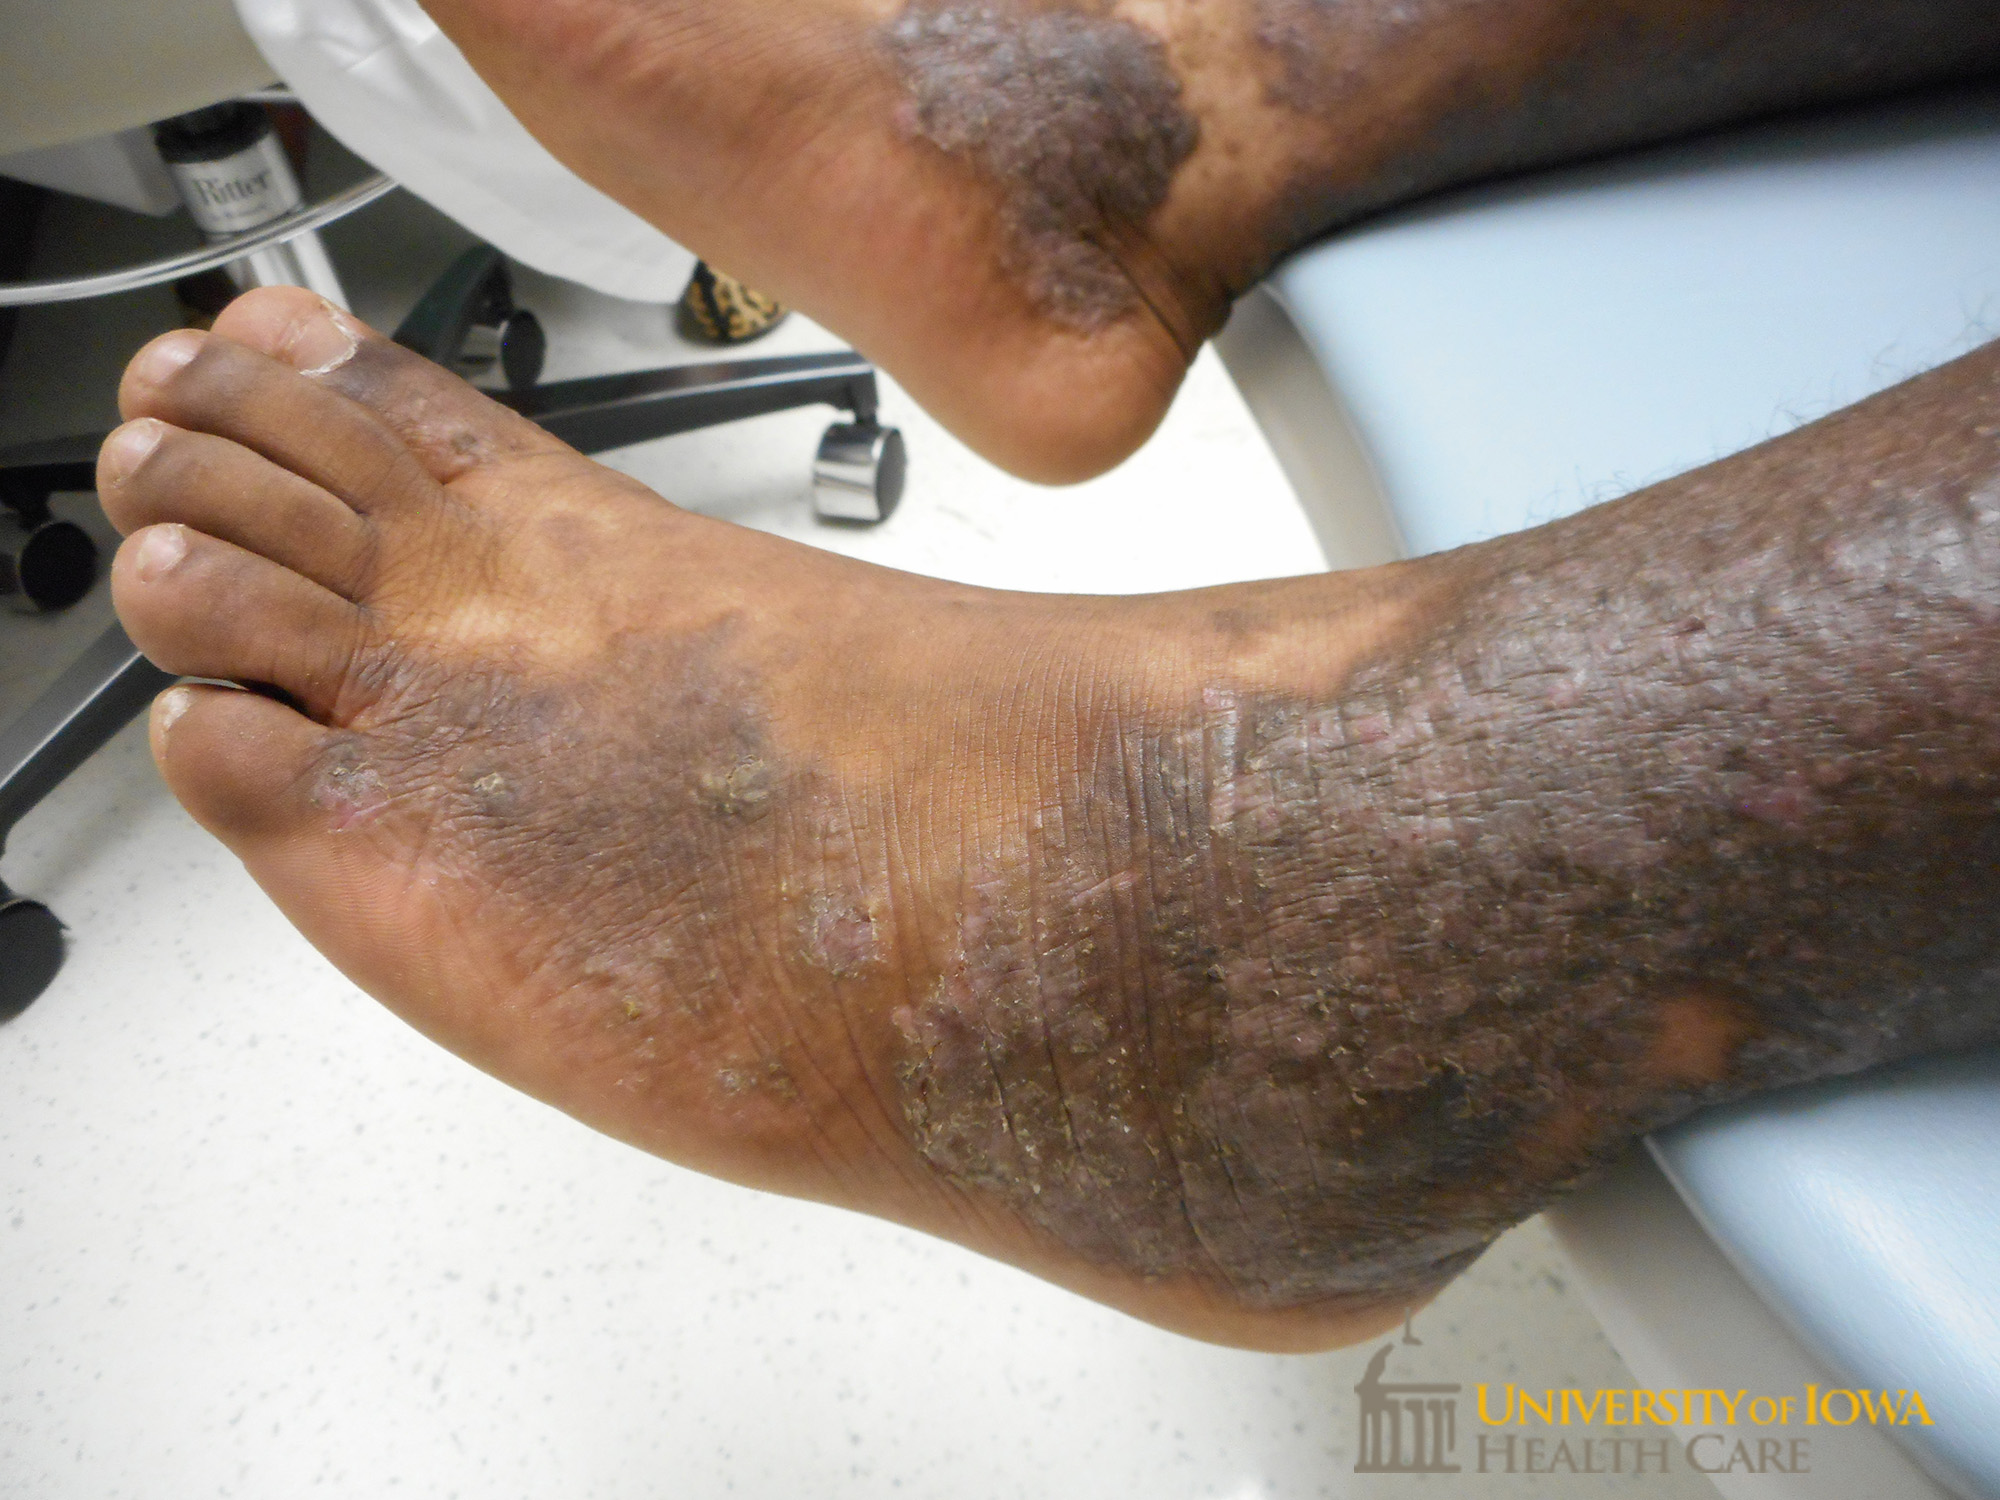 Hyperpigmented scaly plaques on the distal toes and lower leg. (click images for higher resolution).